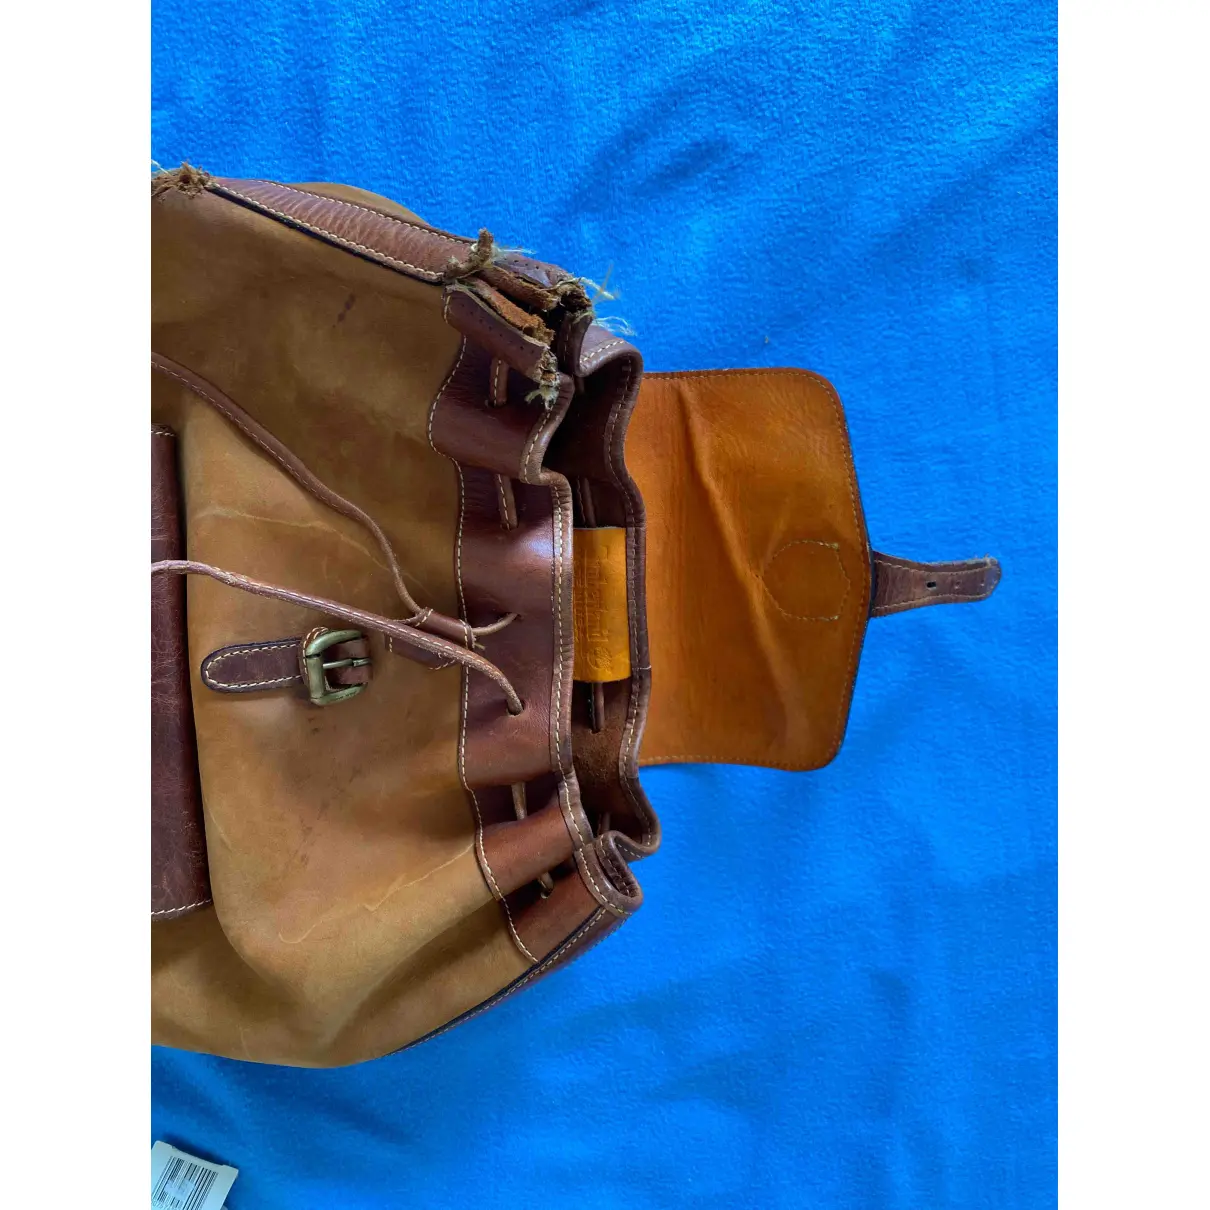 Buy Timberland Leather backpack online